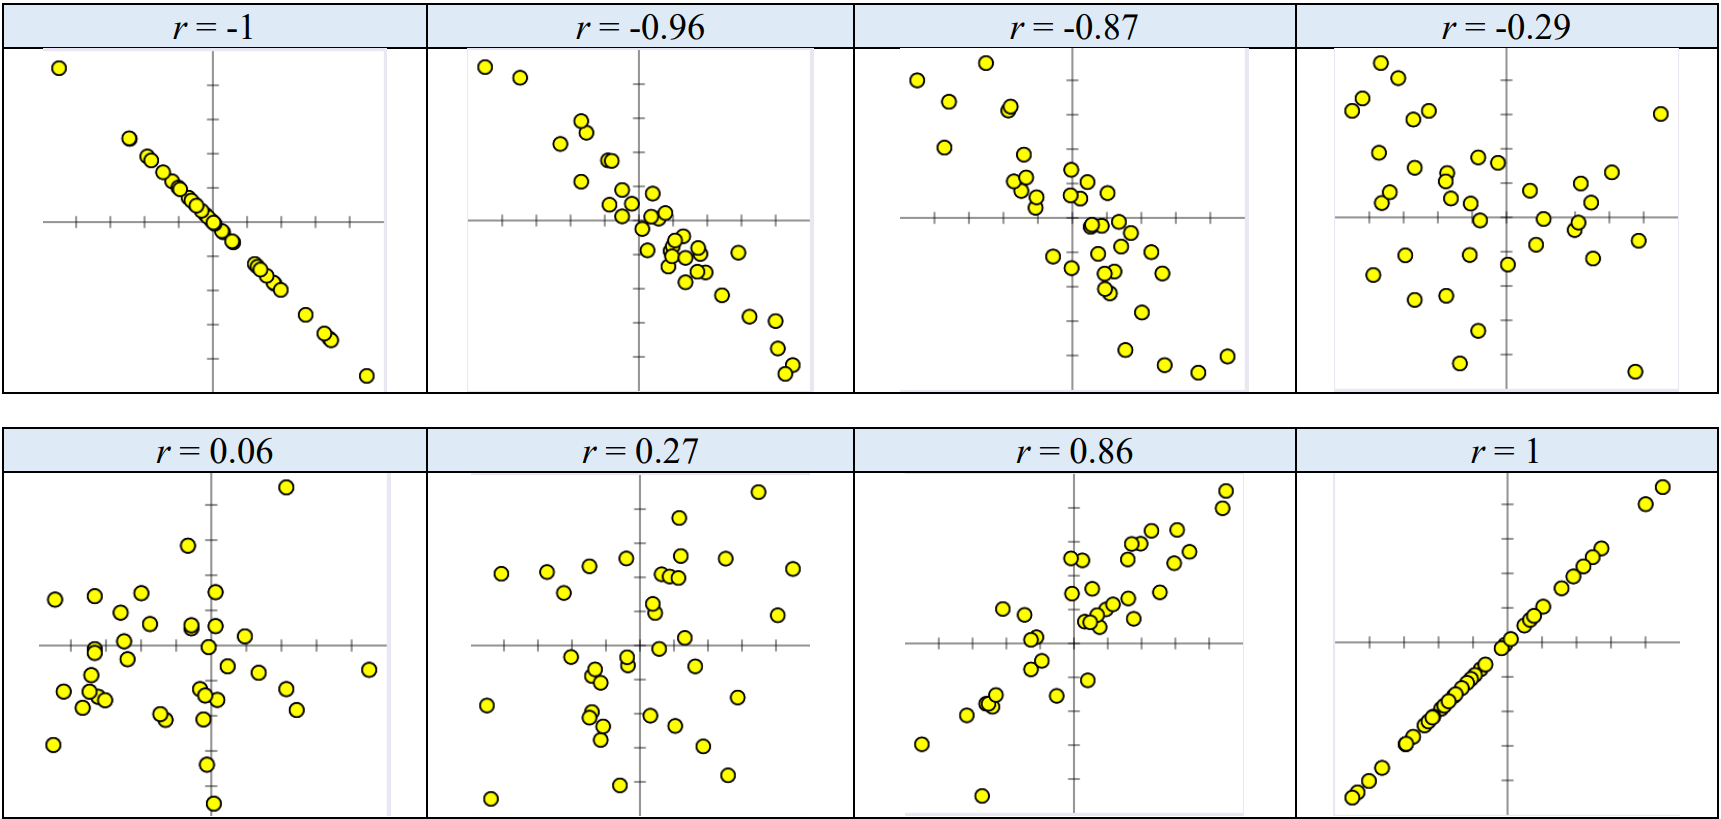 8 sample scatterplots, with correlation values ranging from -1 to 1. Plots form a straight line when r=-1 or r=1, and become more random as r approaches 0.